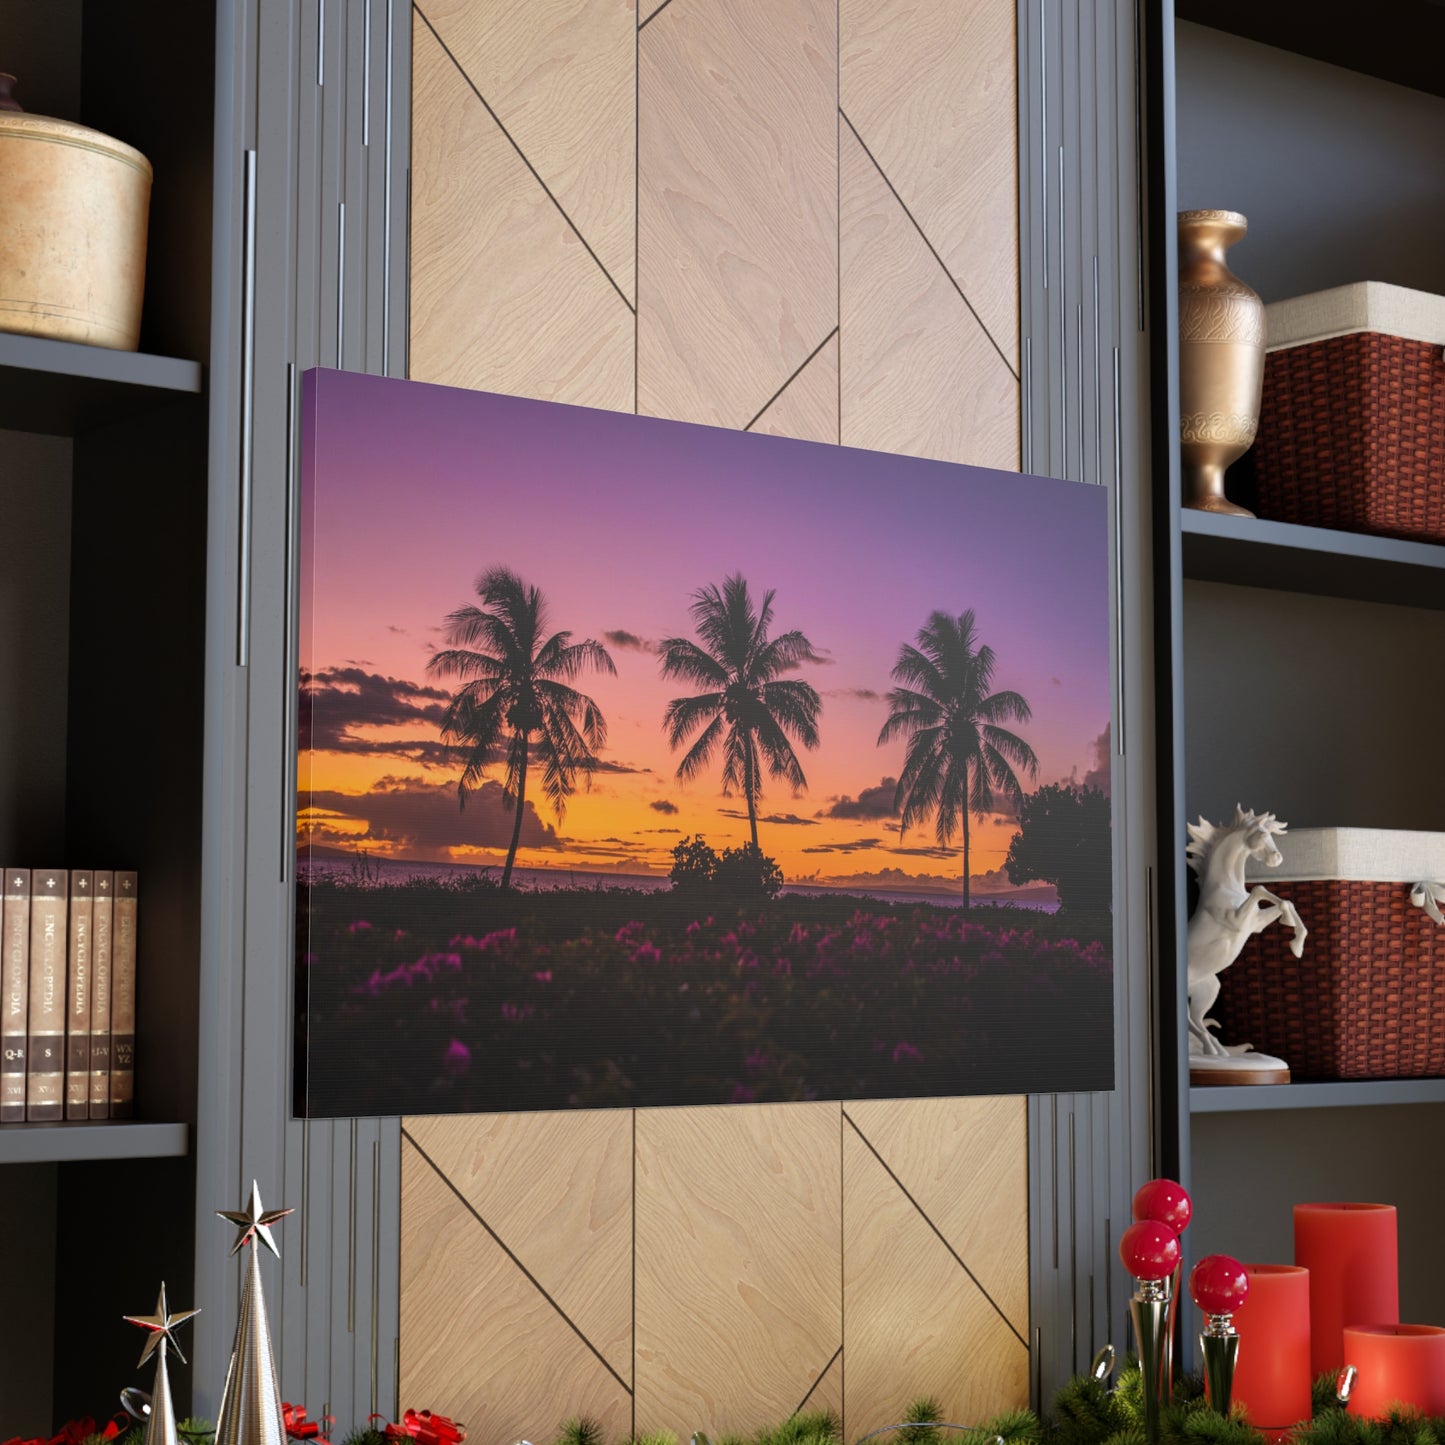 Canvas Print Of Flowers And Palm Trees At Sunset in Hawaii For Wall Art